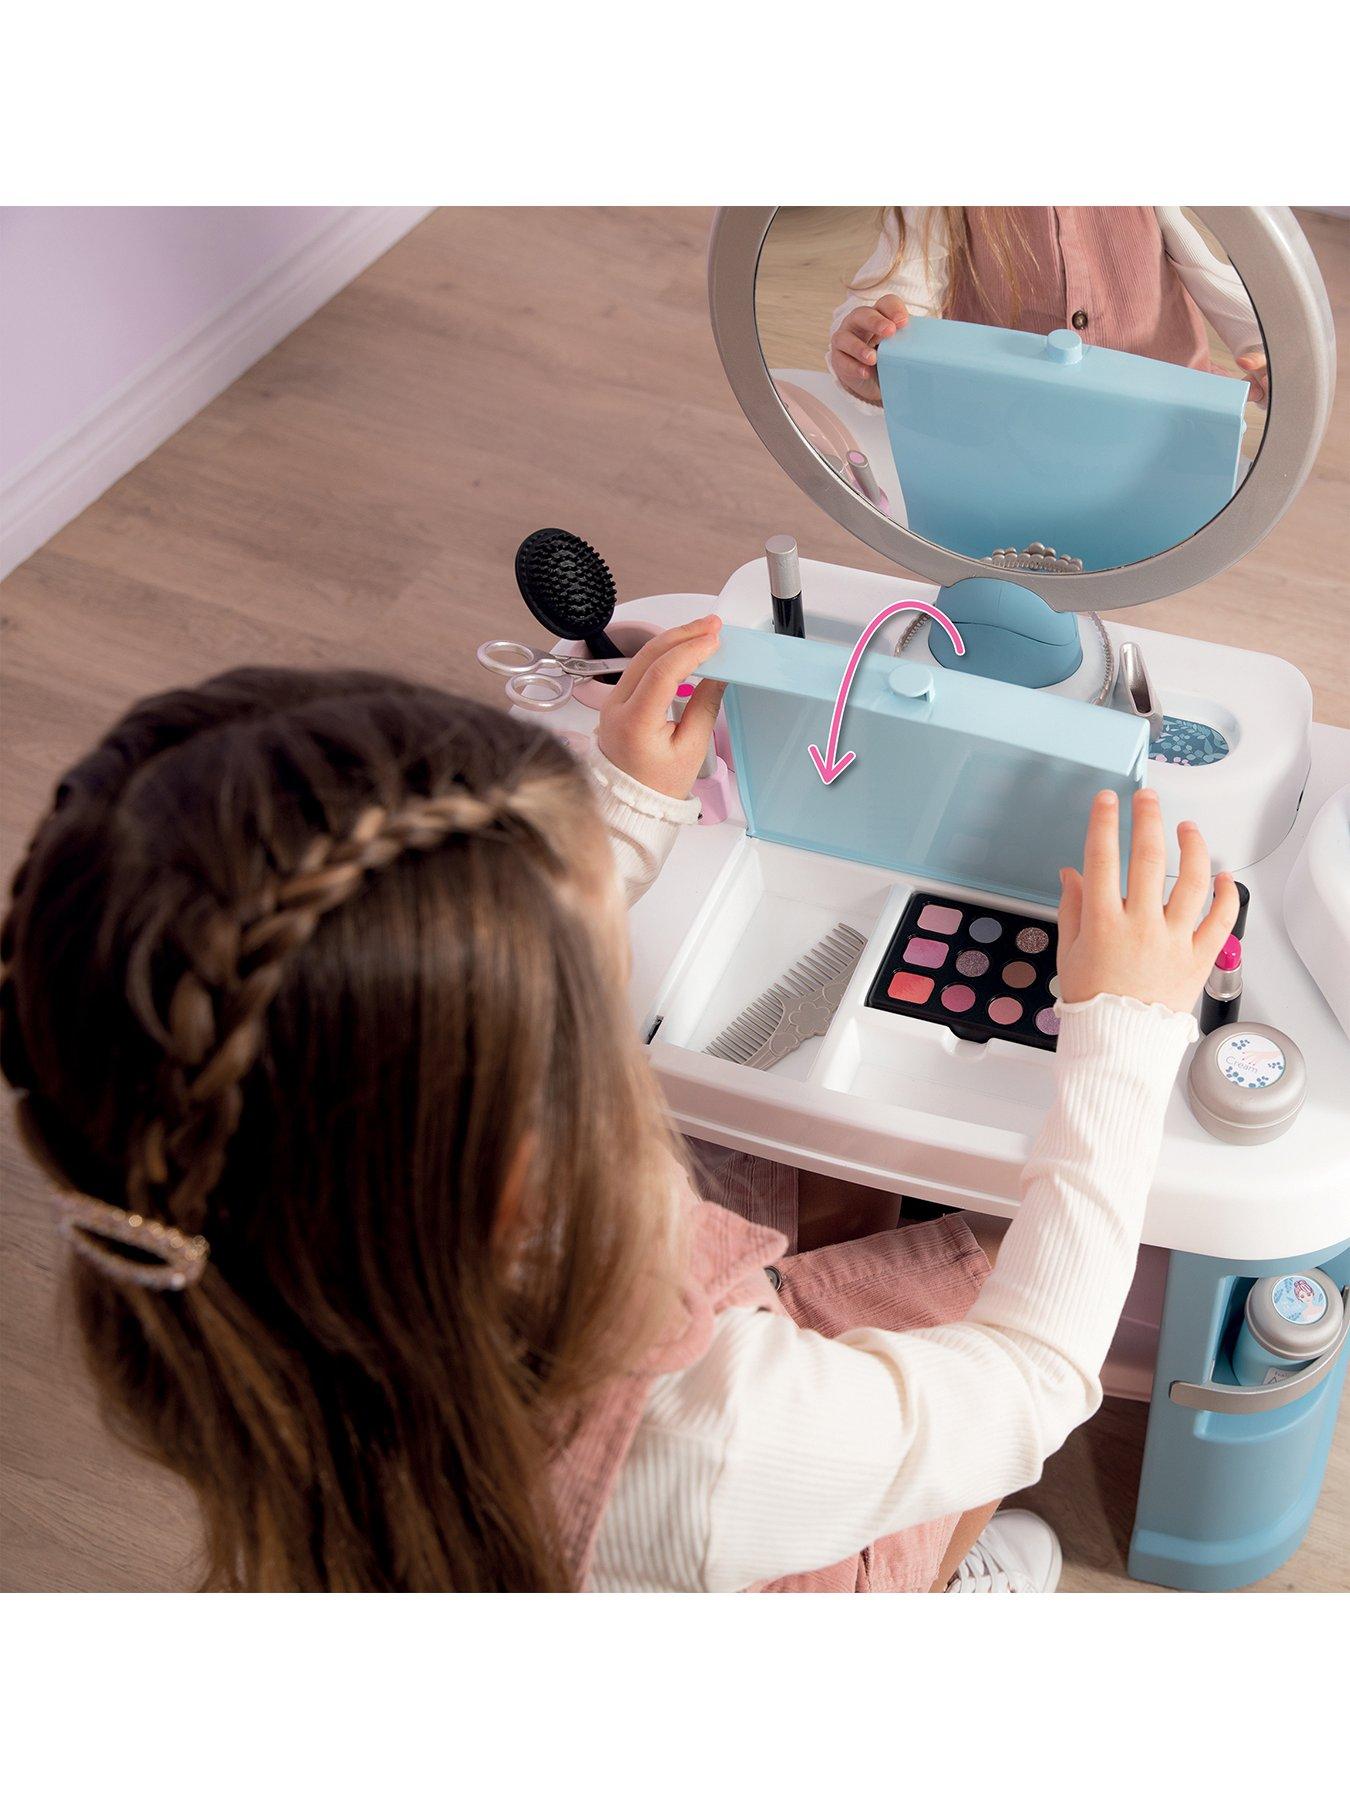 Smoby My Beauty Salon Kids Pretend Role Play Accessories Dressing Table on  OnBuy